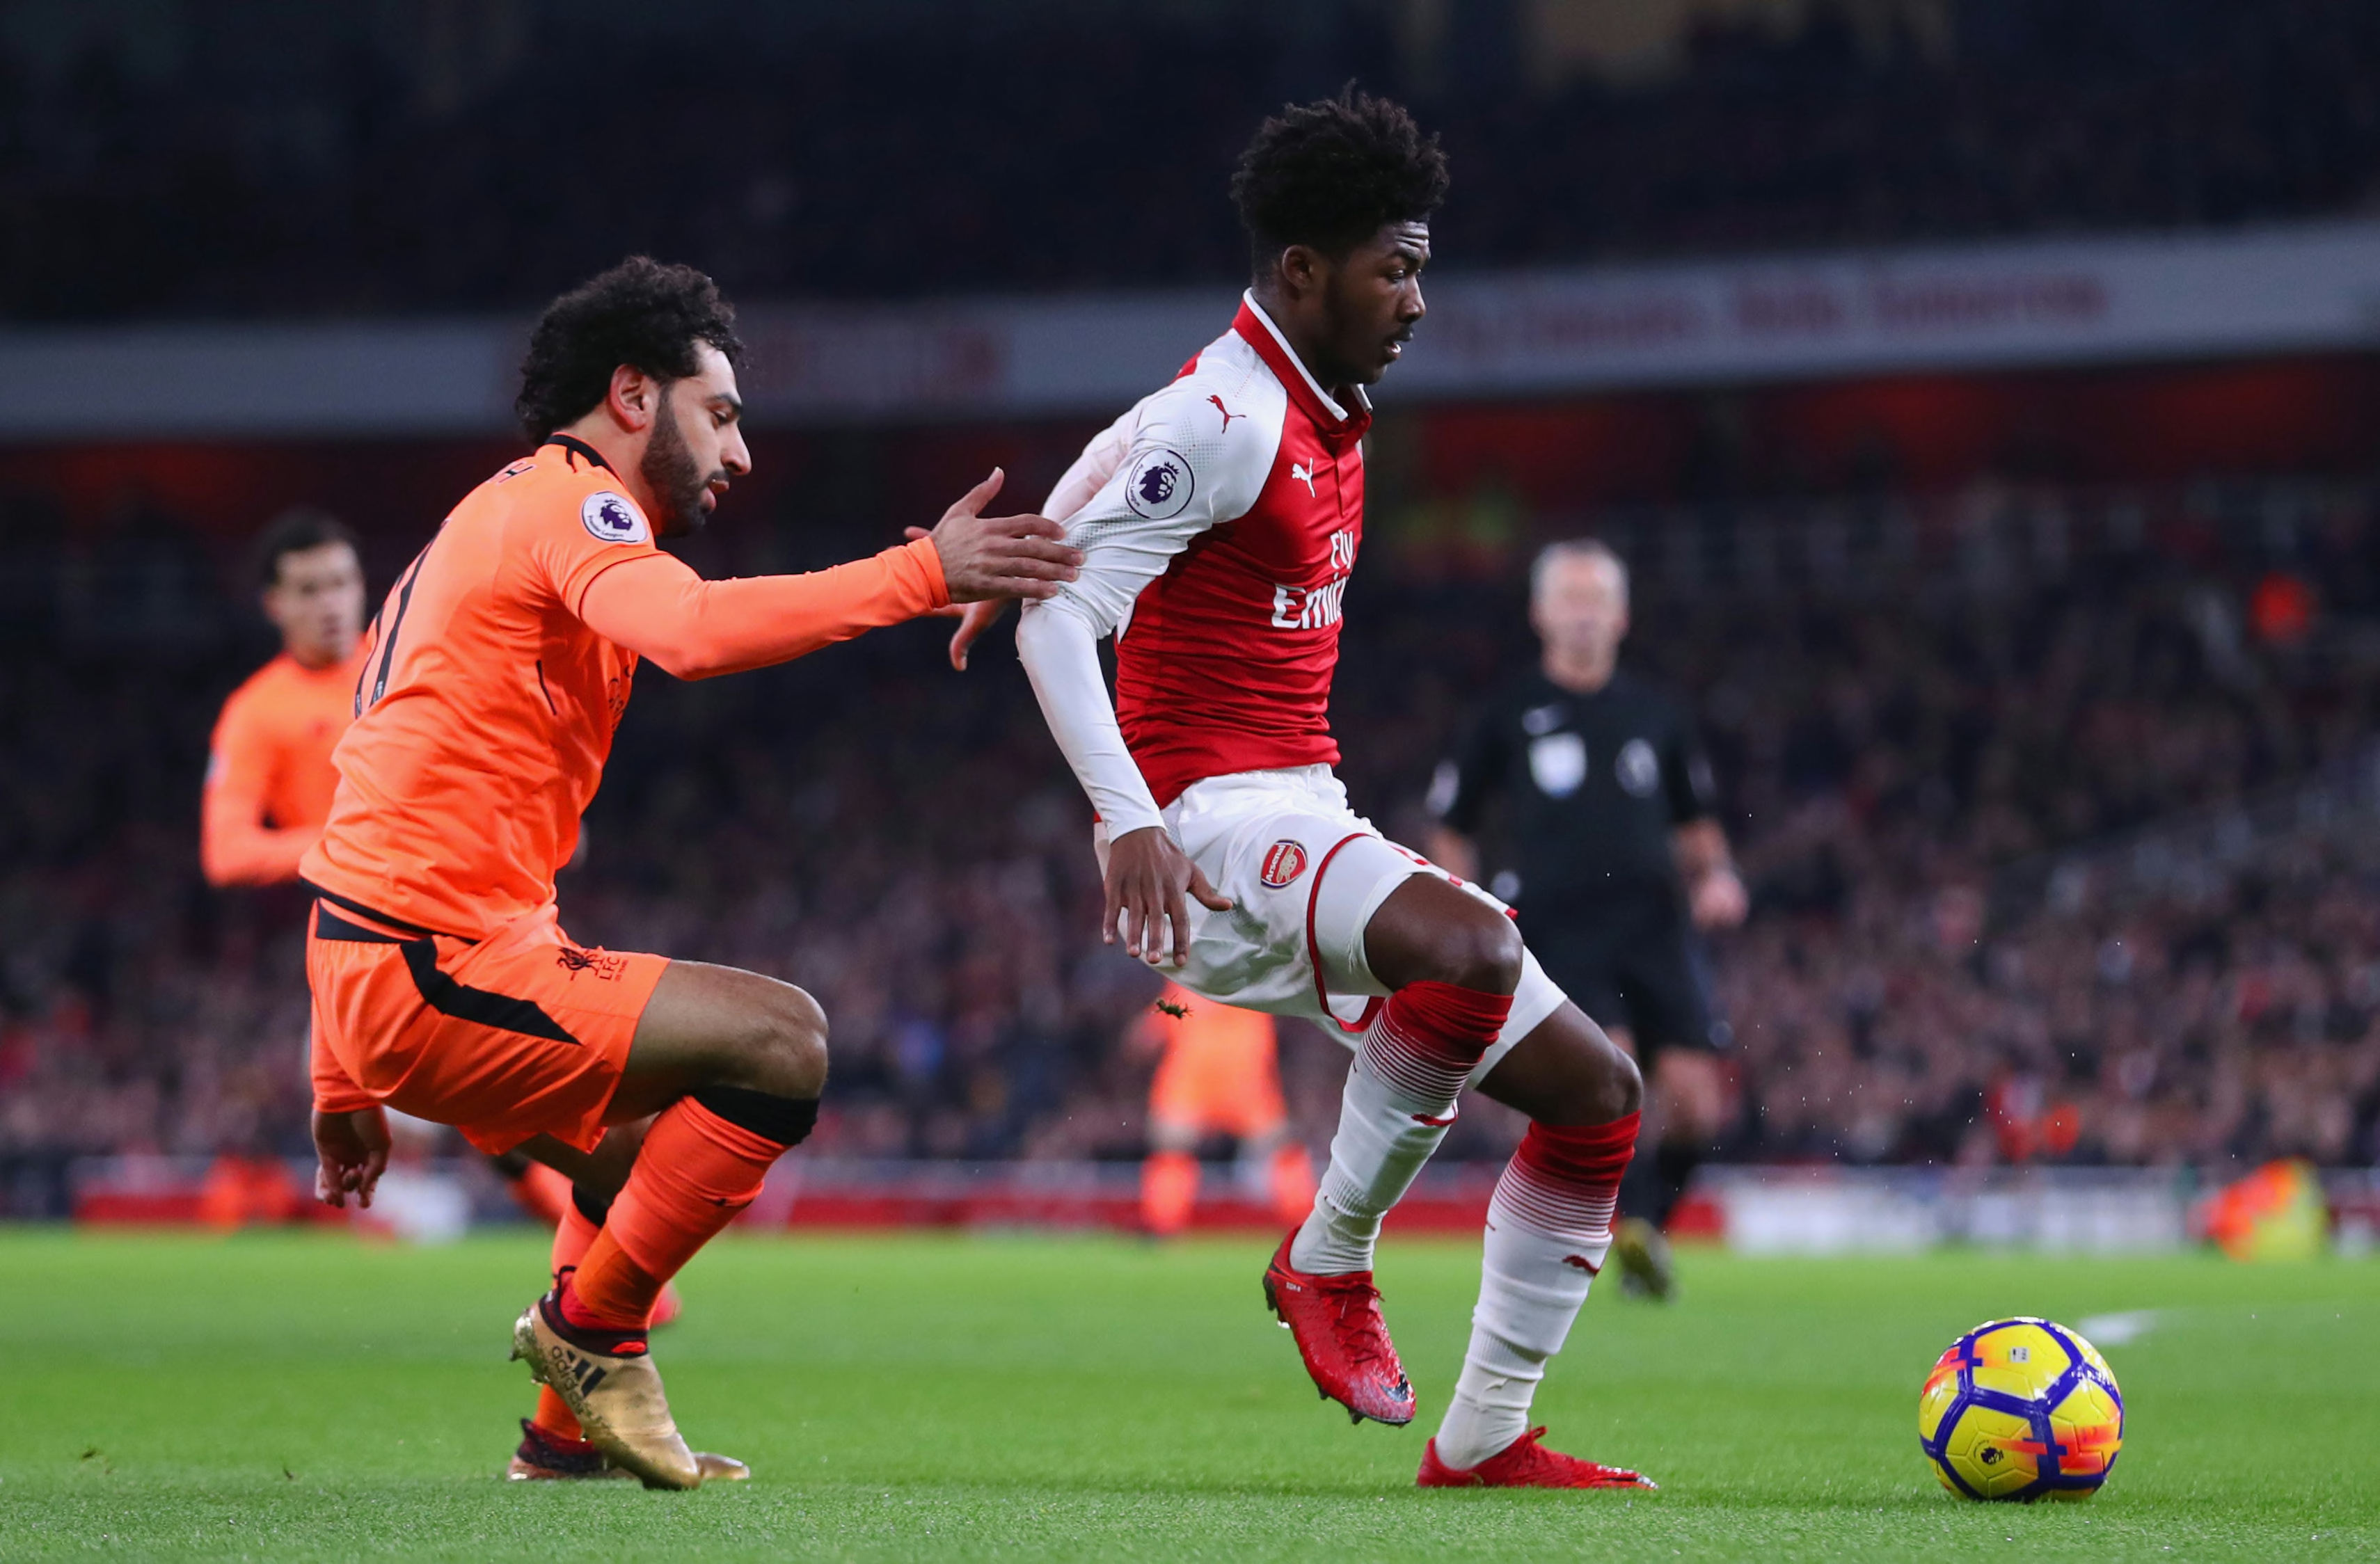 Arsenal vs Liverpool player ratings: Five minutes in ...